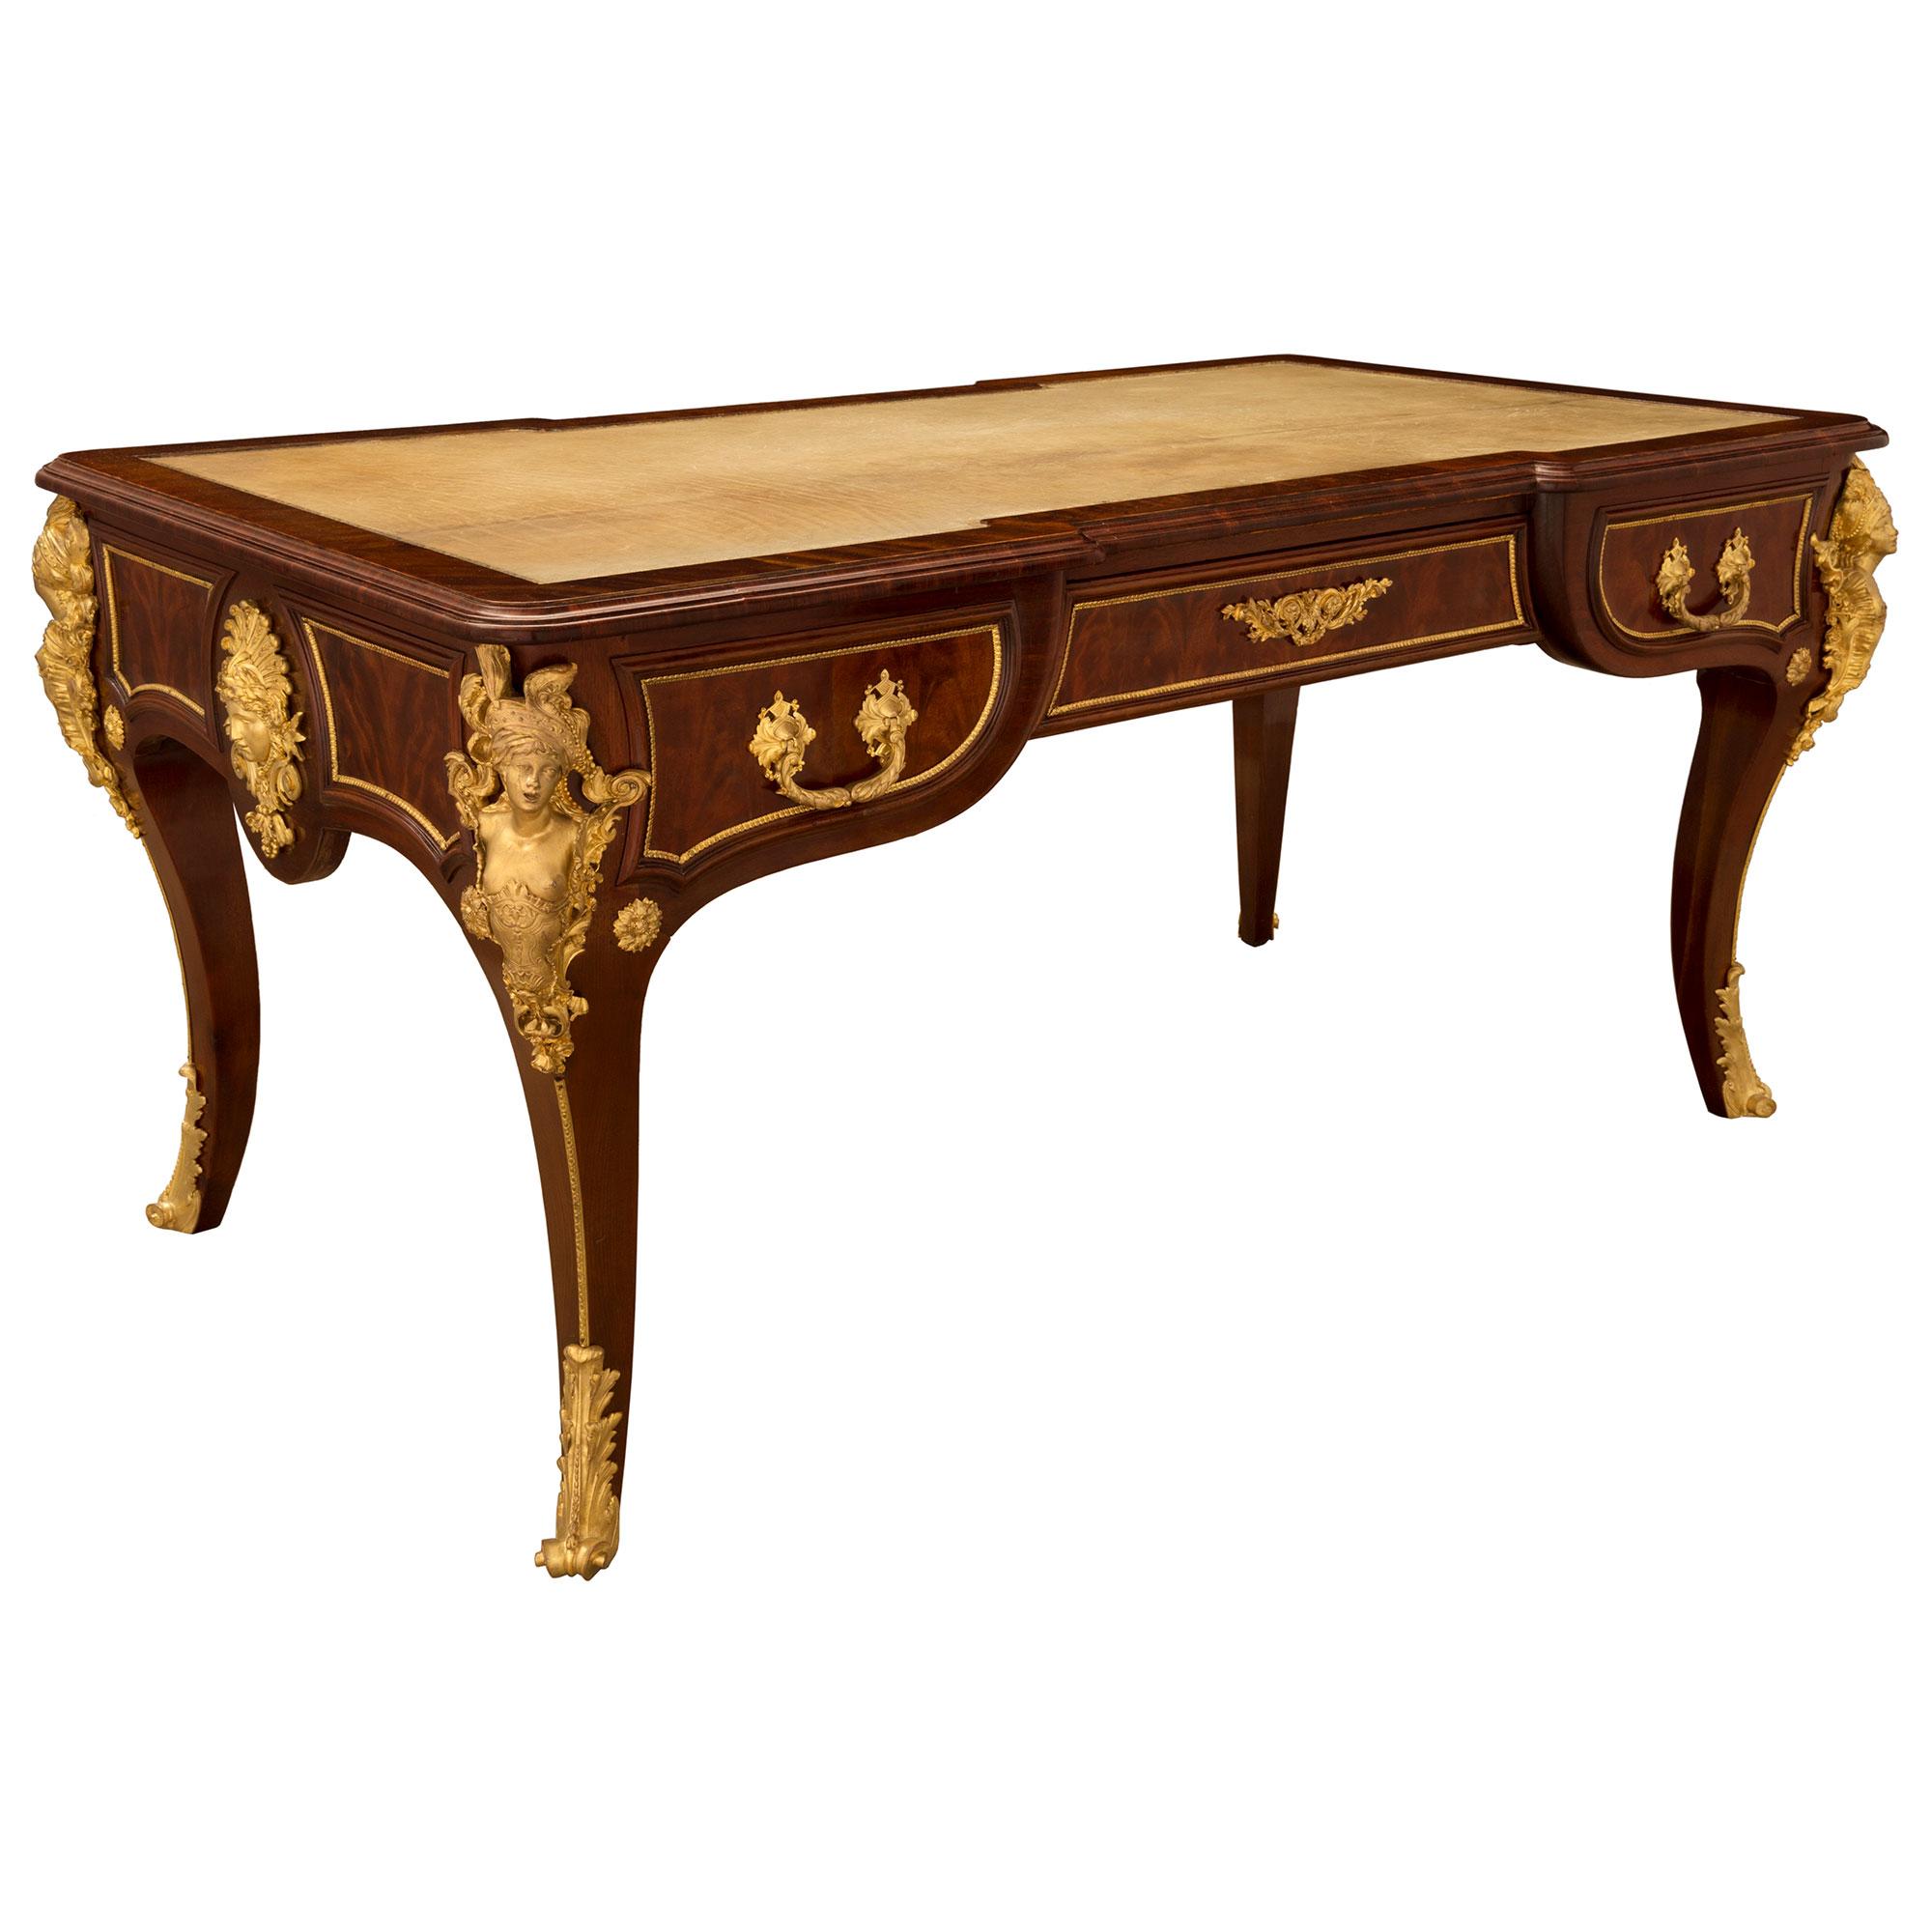 French 19th Century Louis XV Style Flamed Mahogany and Ormolu Bureau Plat Desk In Good Condition For Sale In West Palm Beach, FL